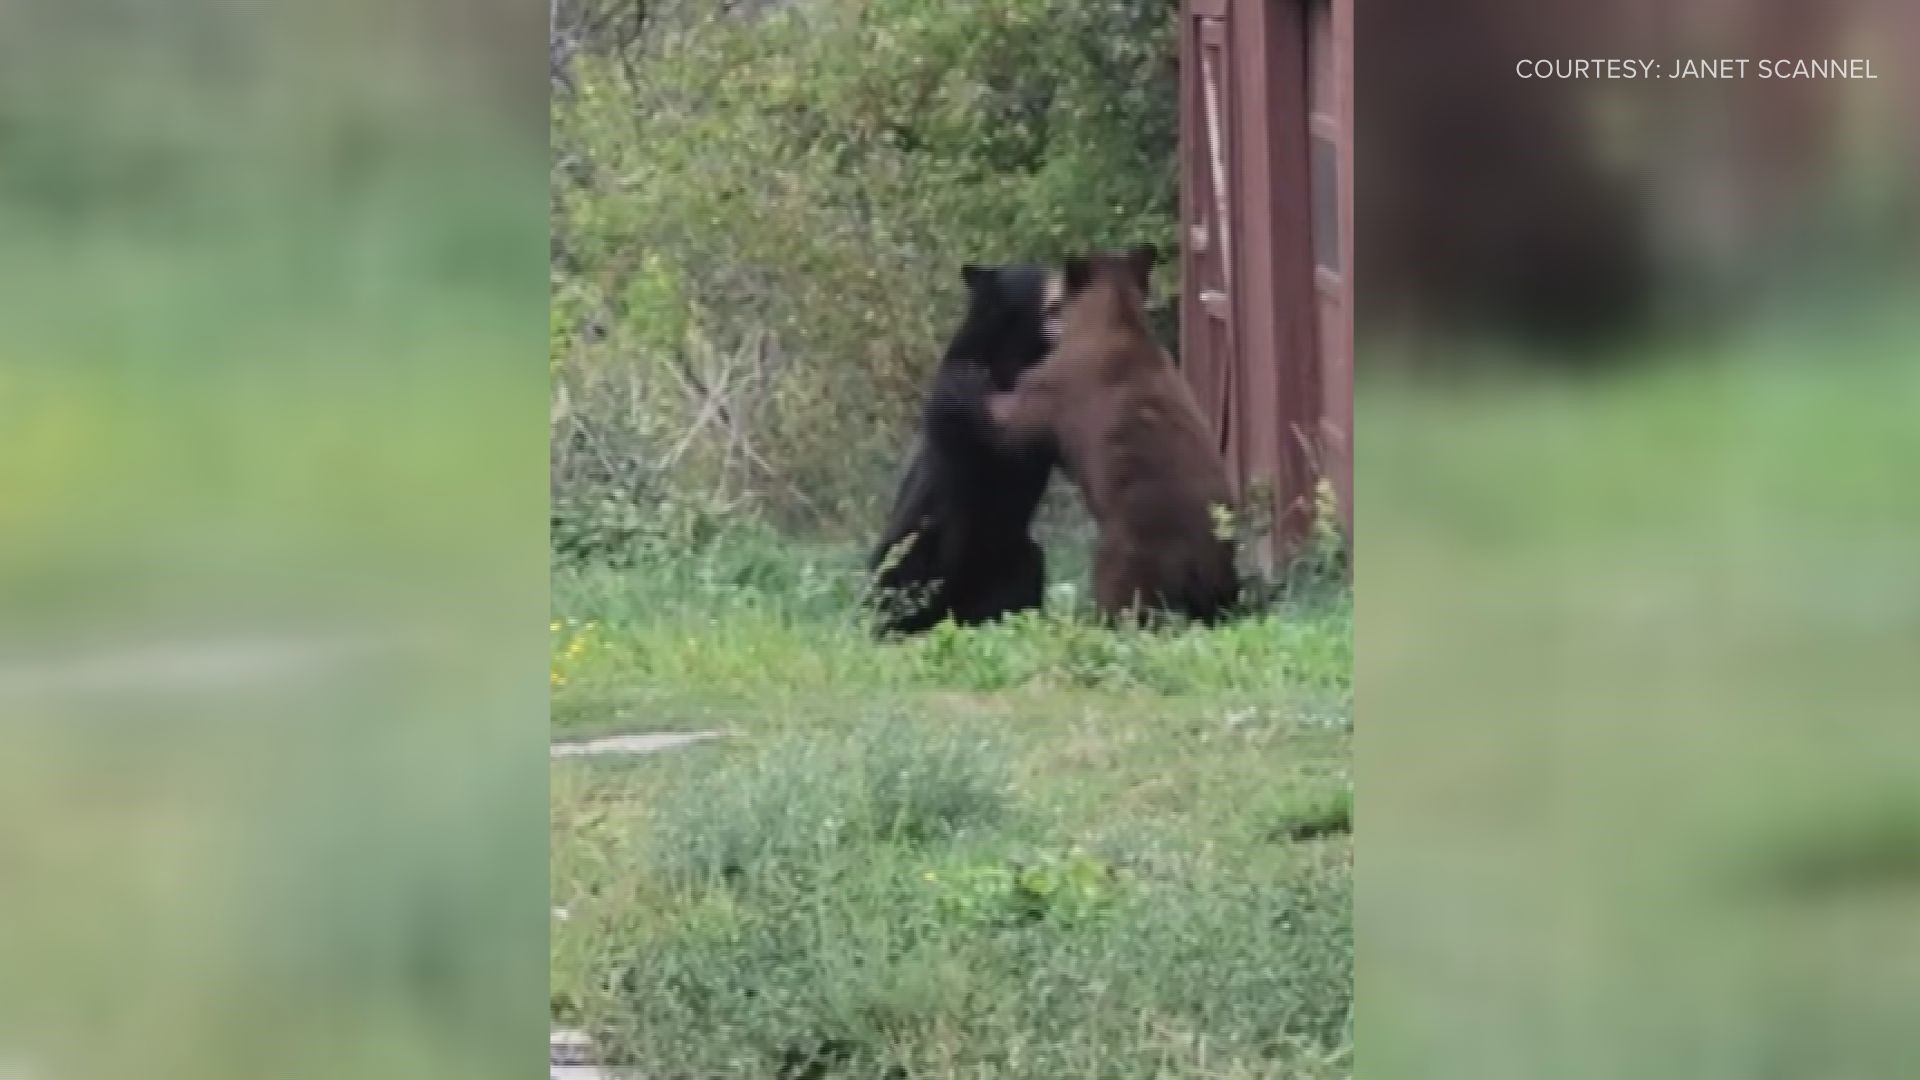 Viewer Janet Scannell shared video of these two bears playing together in the North Boulder foothills on Tuesday.